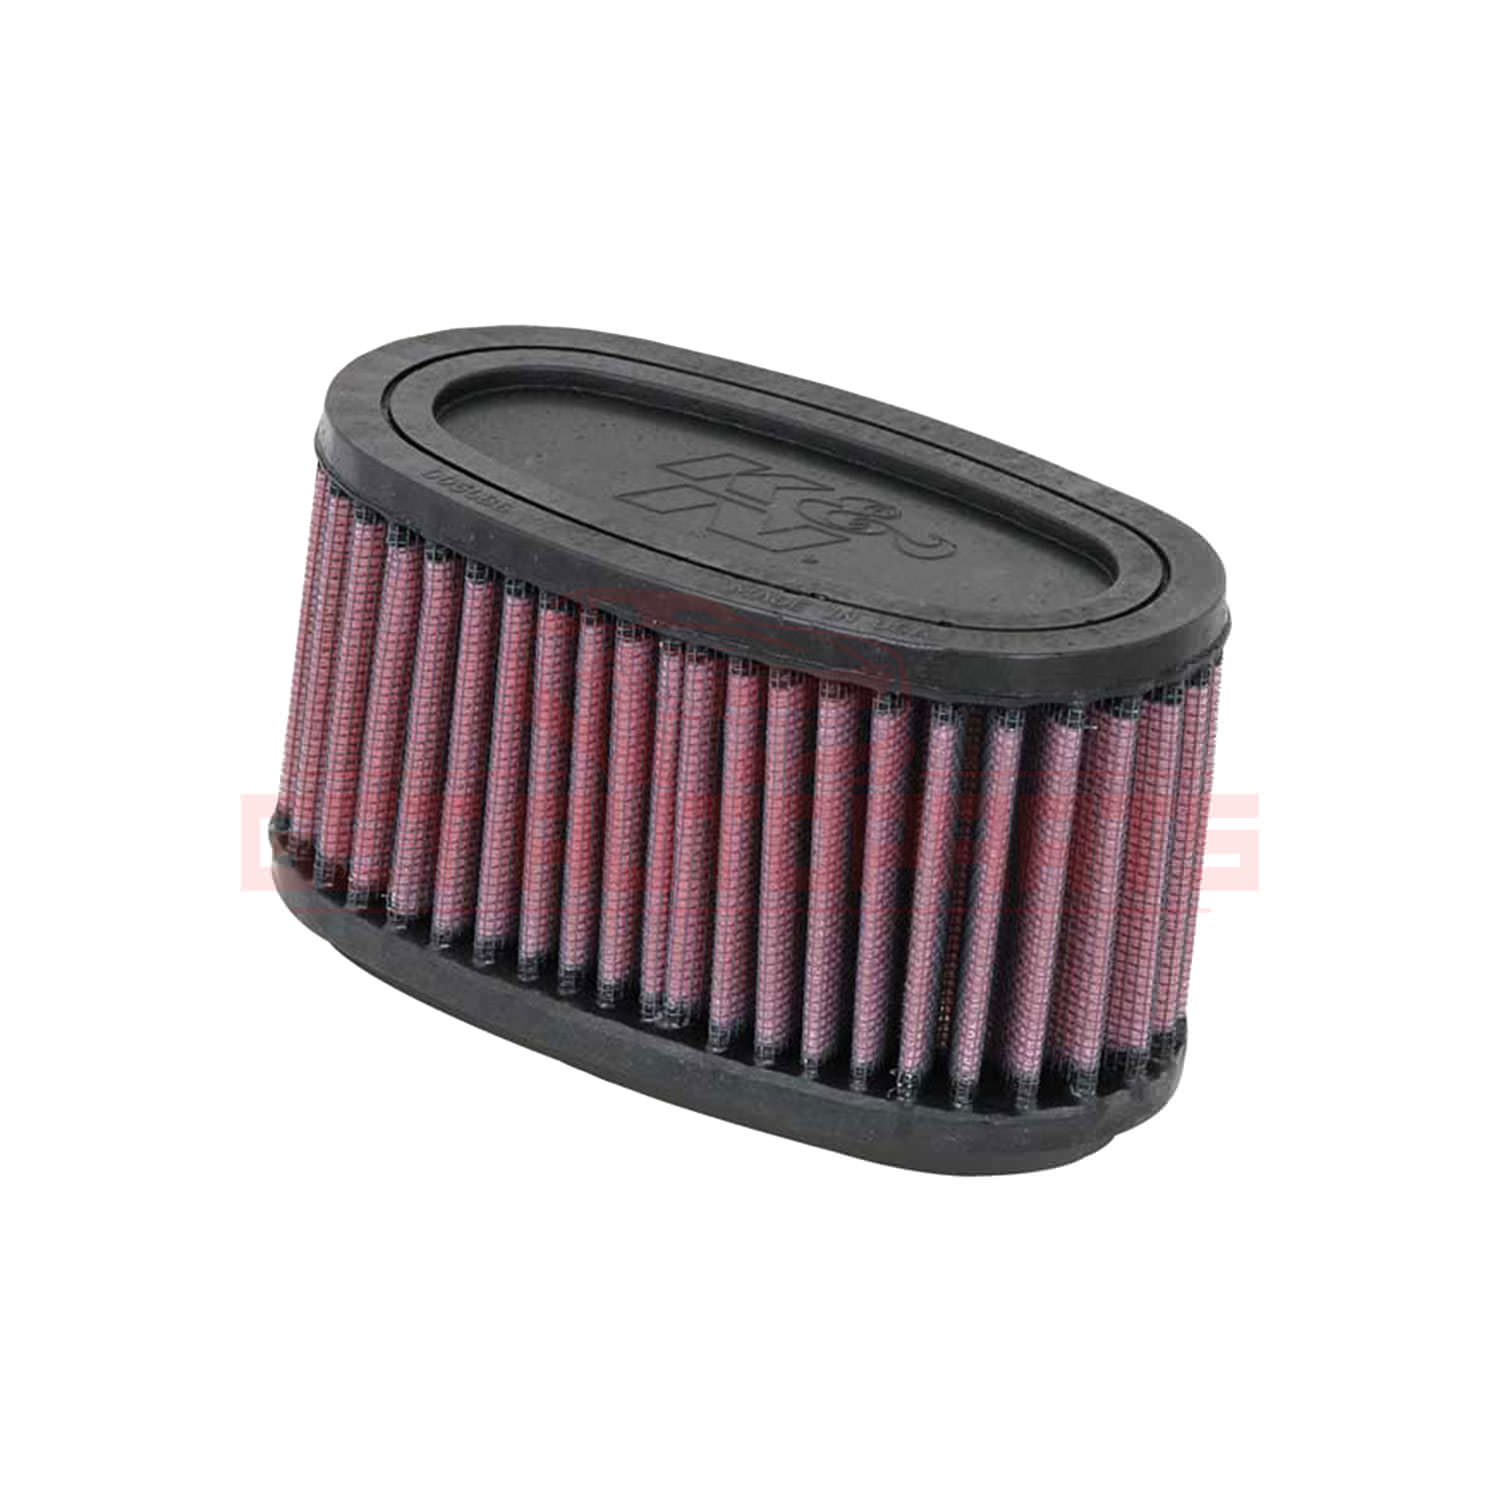 K&N Replacement Air Filter for Honda VT750C2 Shadow Spirit ABS 2013-2014